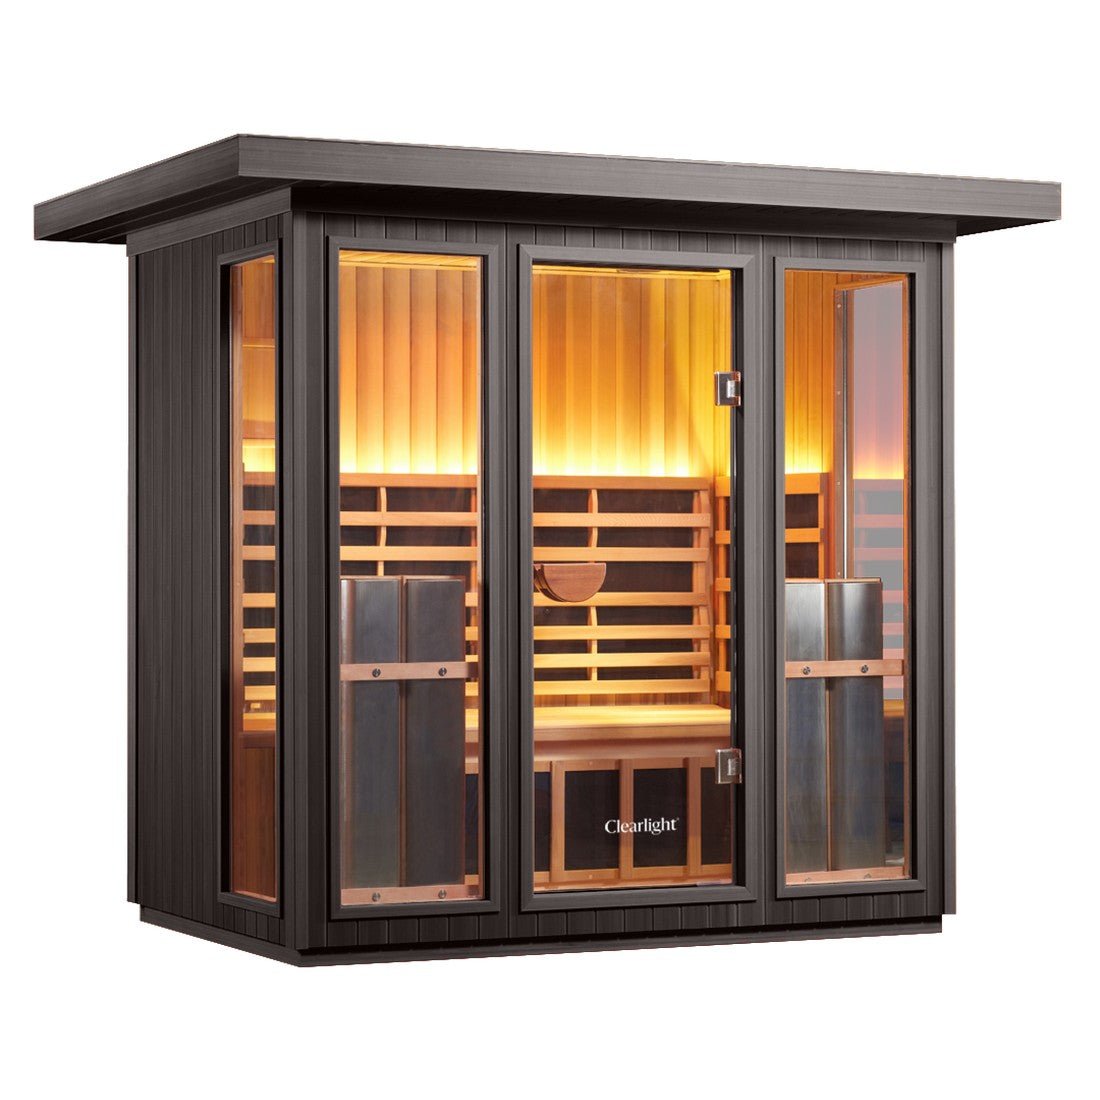 Clearlight Sanctuary™ Outdoor 5 Five Person Full Spectrum Infrared Sauna - Purely Relaxation